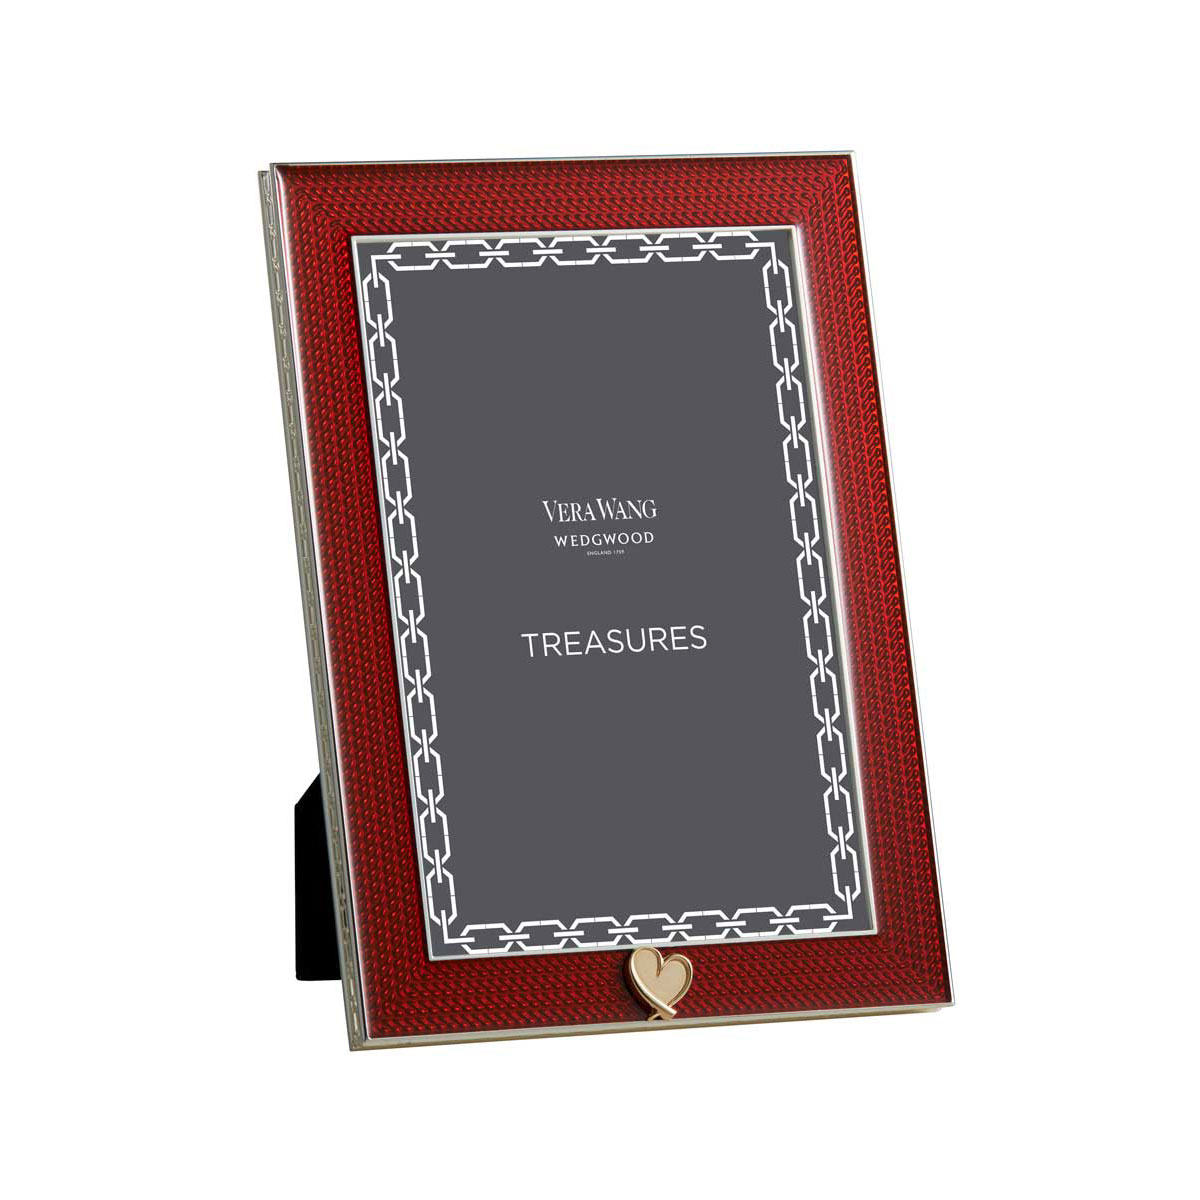 Vera Wang Wedgwood Treasures With Love Red Heart 4x6" Frame